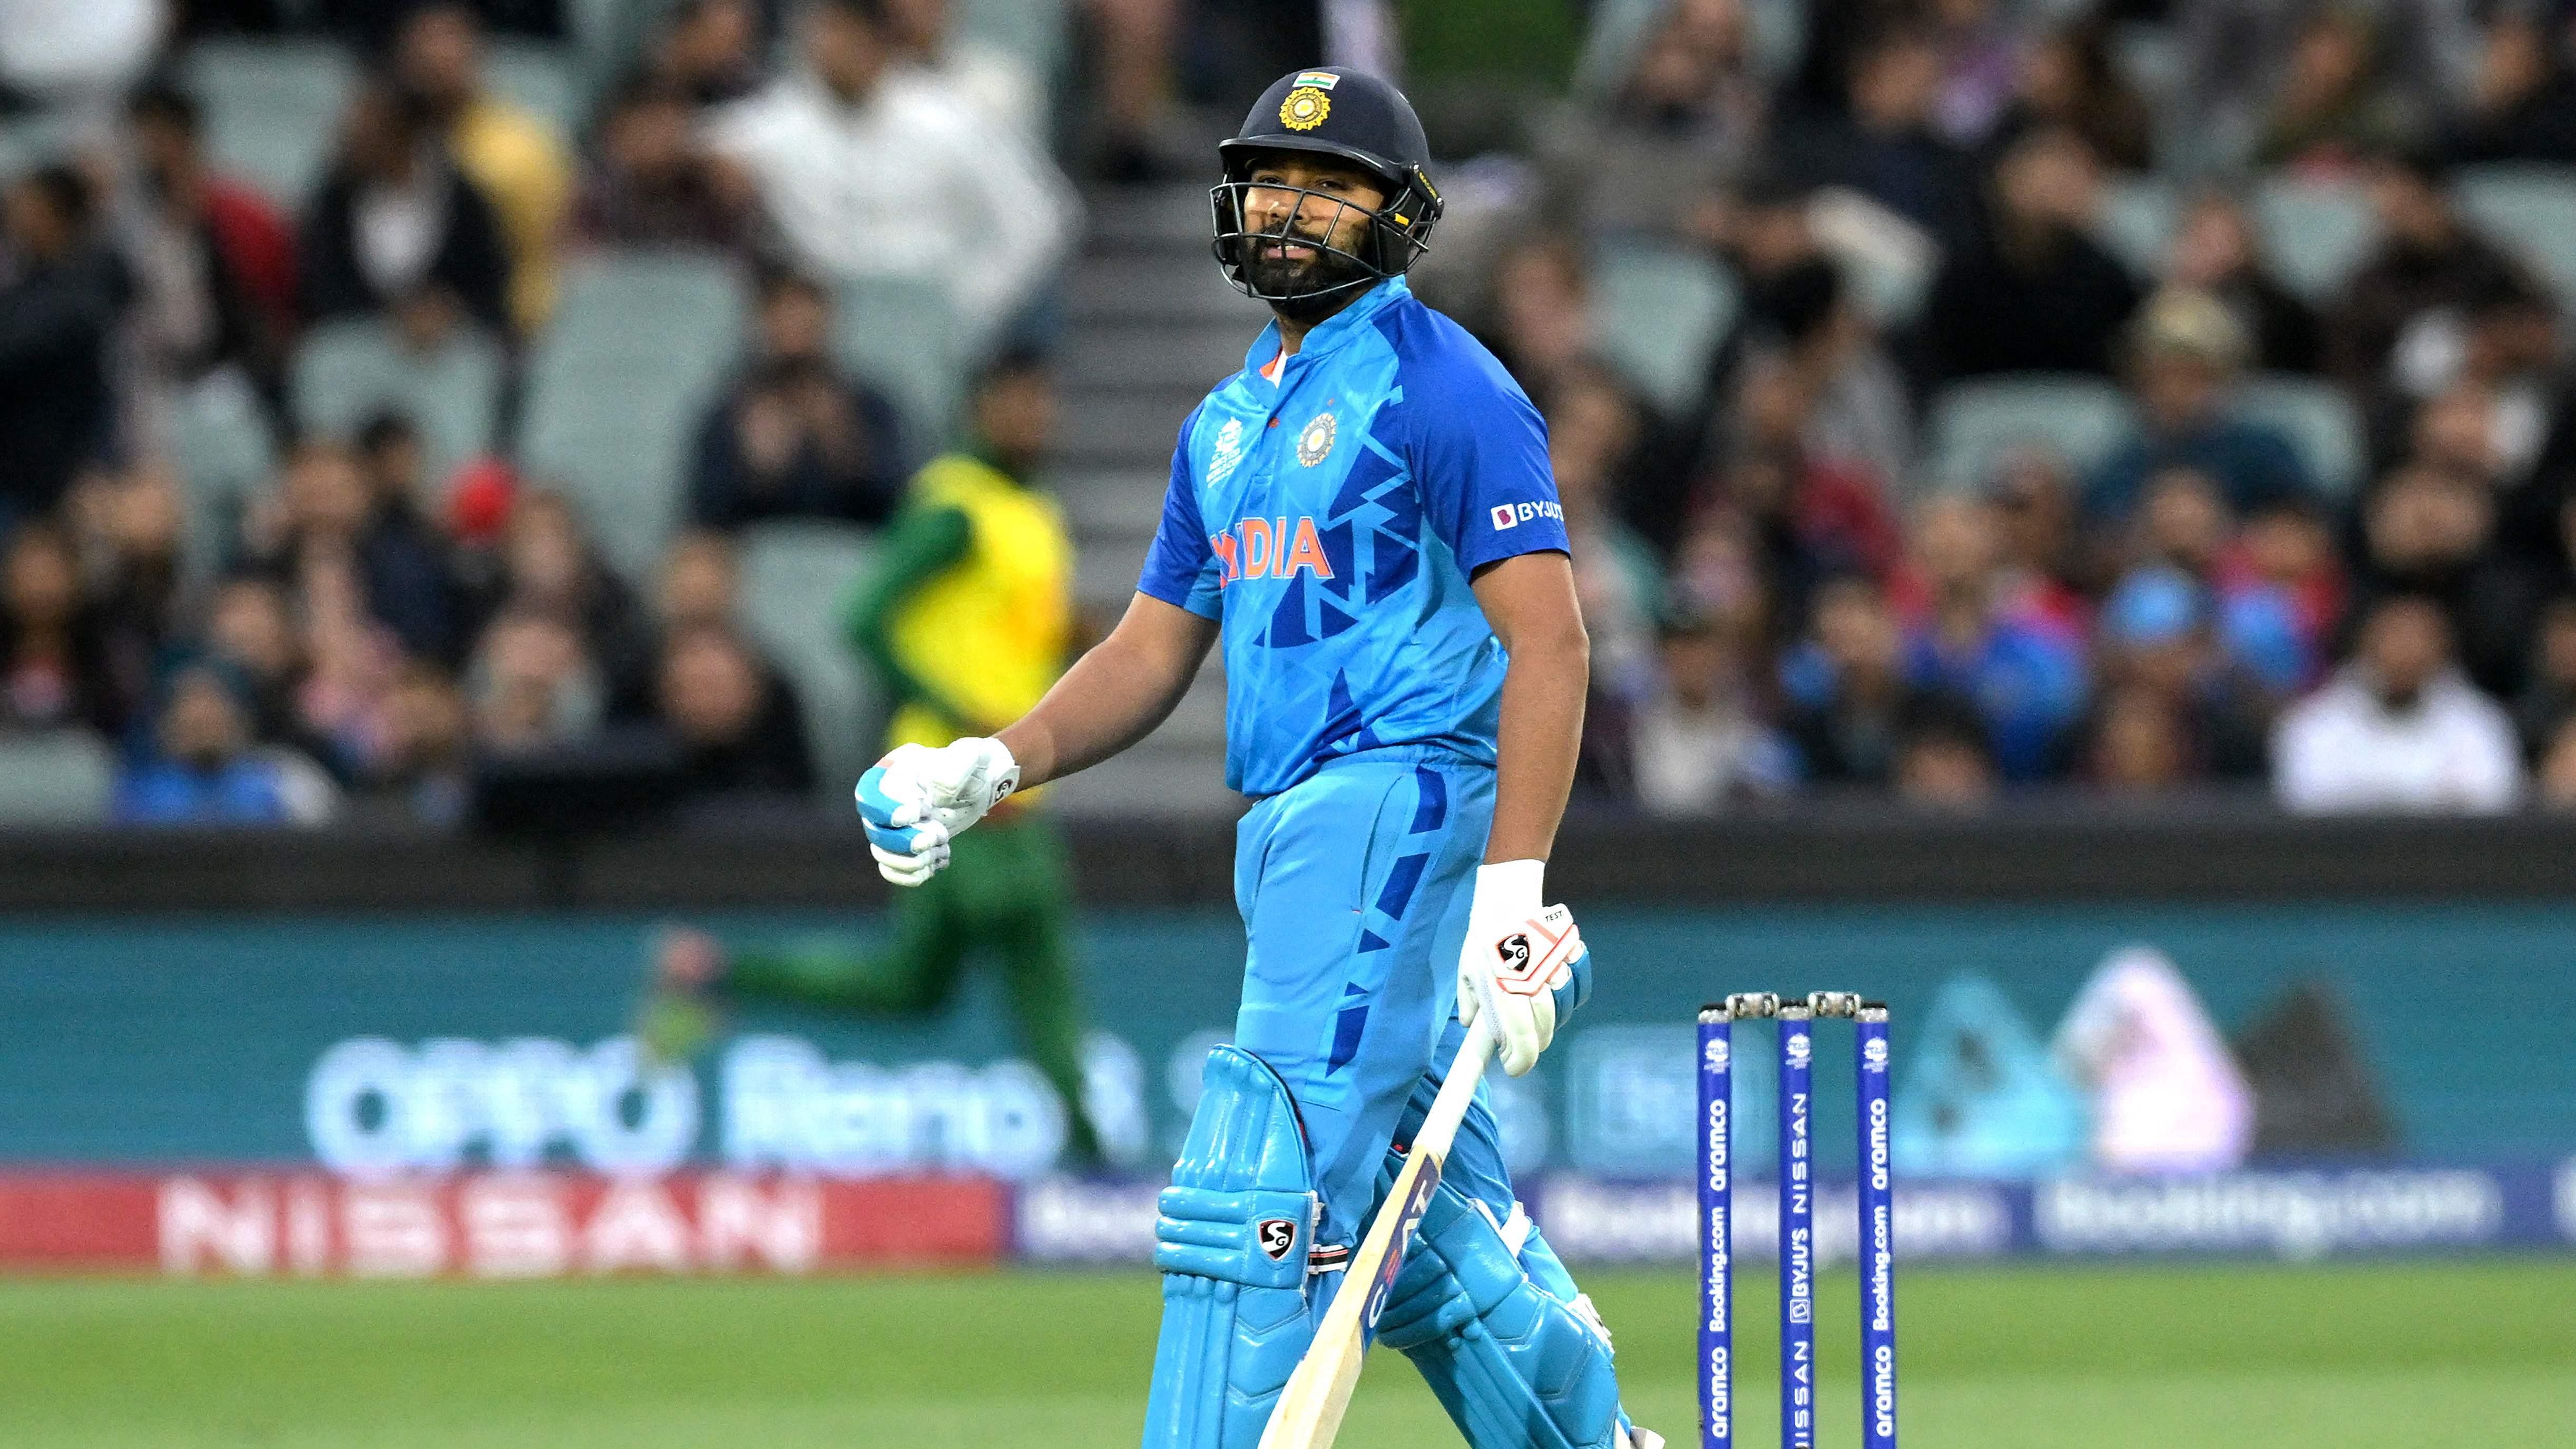 A semifinal berth will be a step in the right direction for Rohit, under whose captaincy players have sensed a greater degree of security than ever before. Credit: AFP File Photo